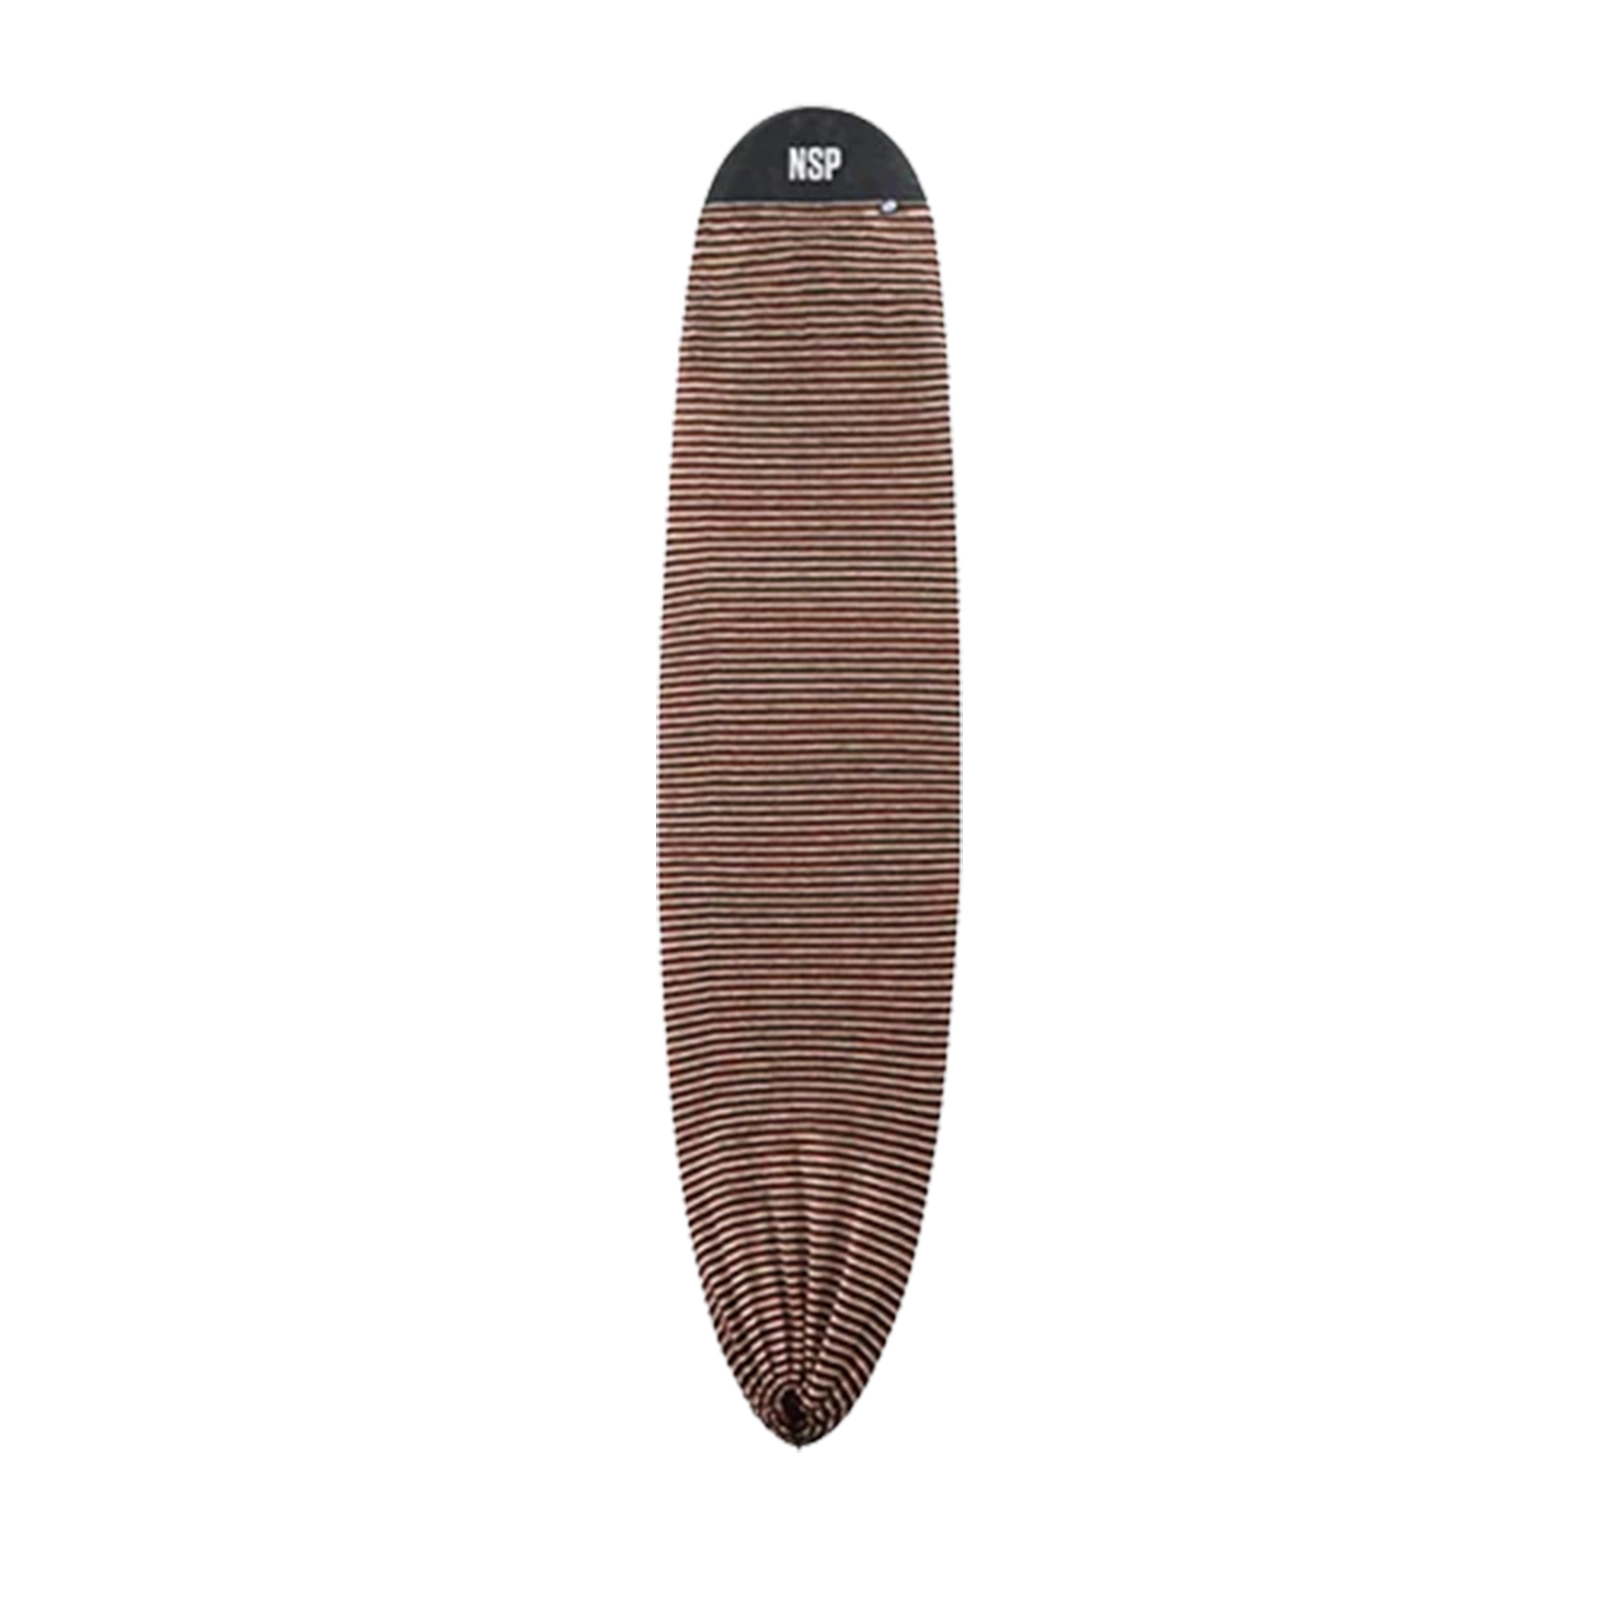 Board Sock Surfboard Cases & Bags NSP 8'0" Round nose 